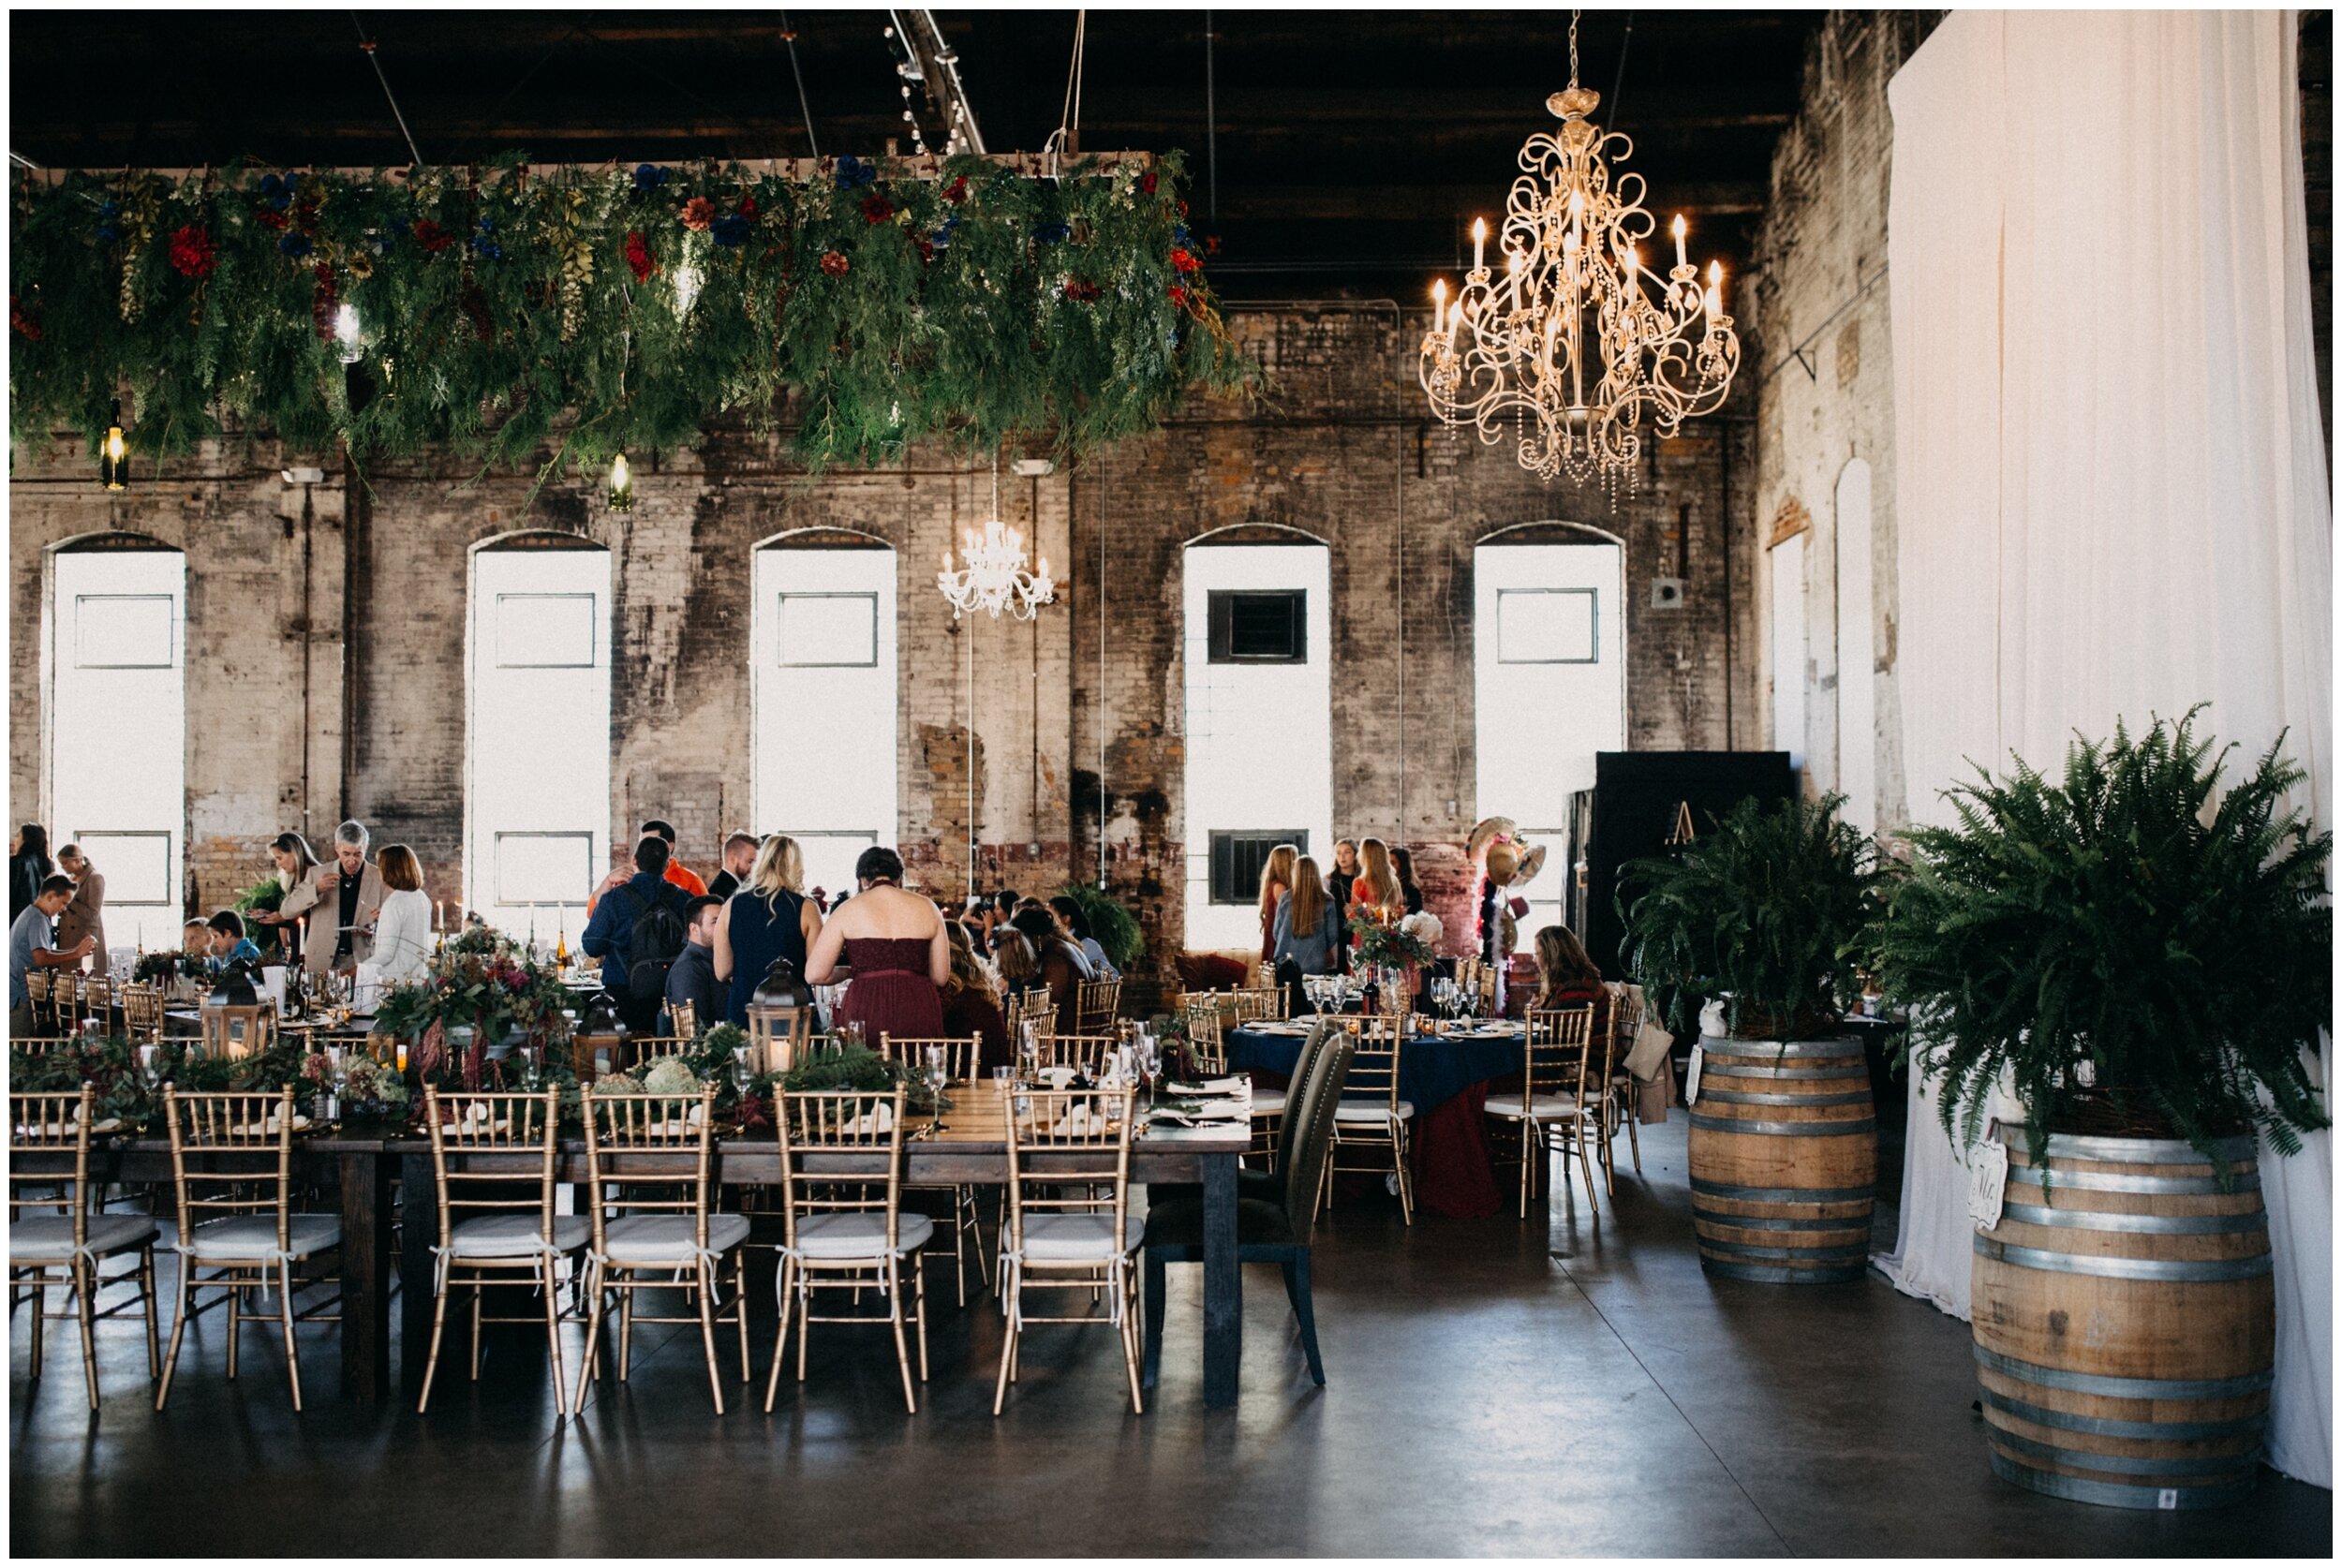 Floral chandelier and fern decor at Northern Pacific Center industrial warehouse wedding reception